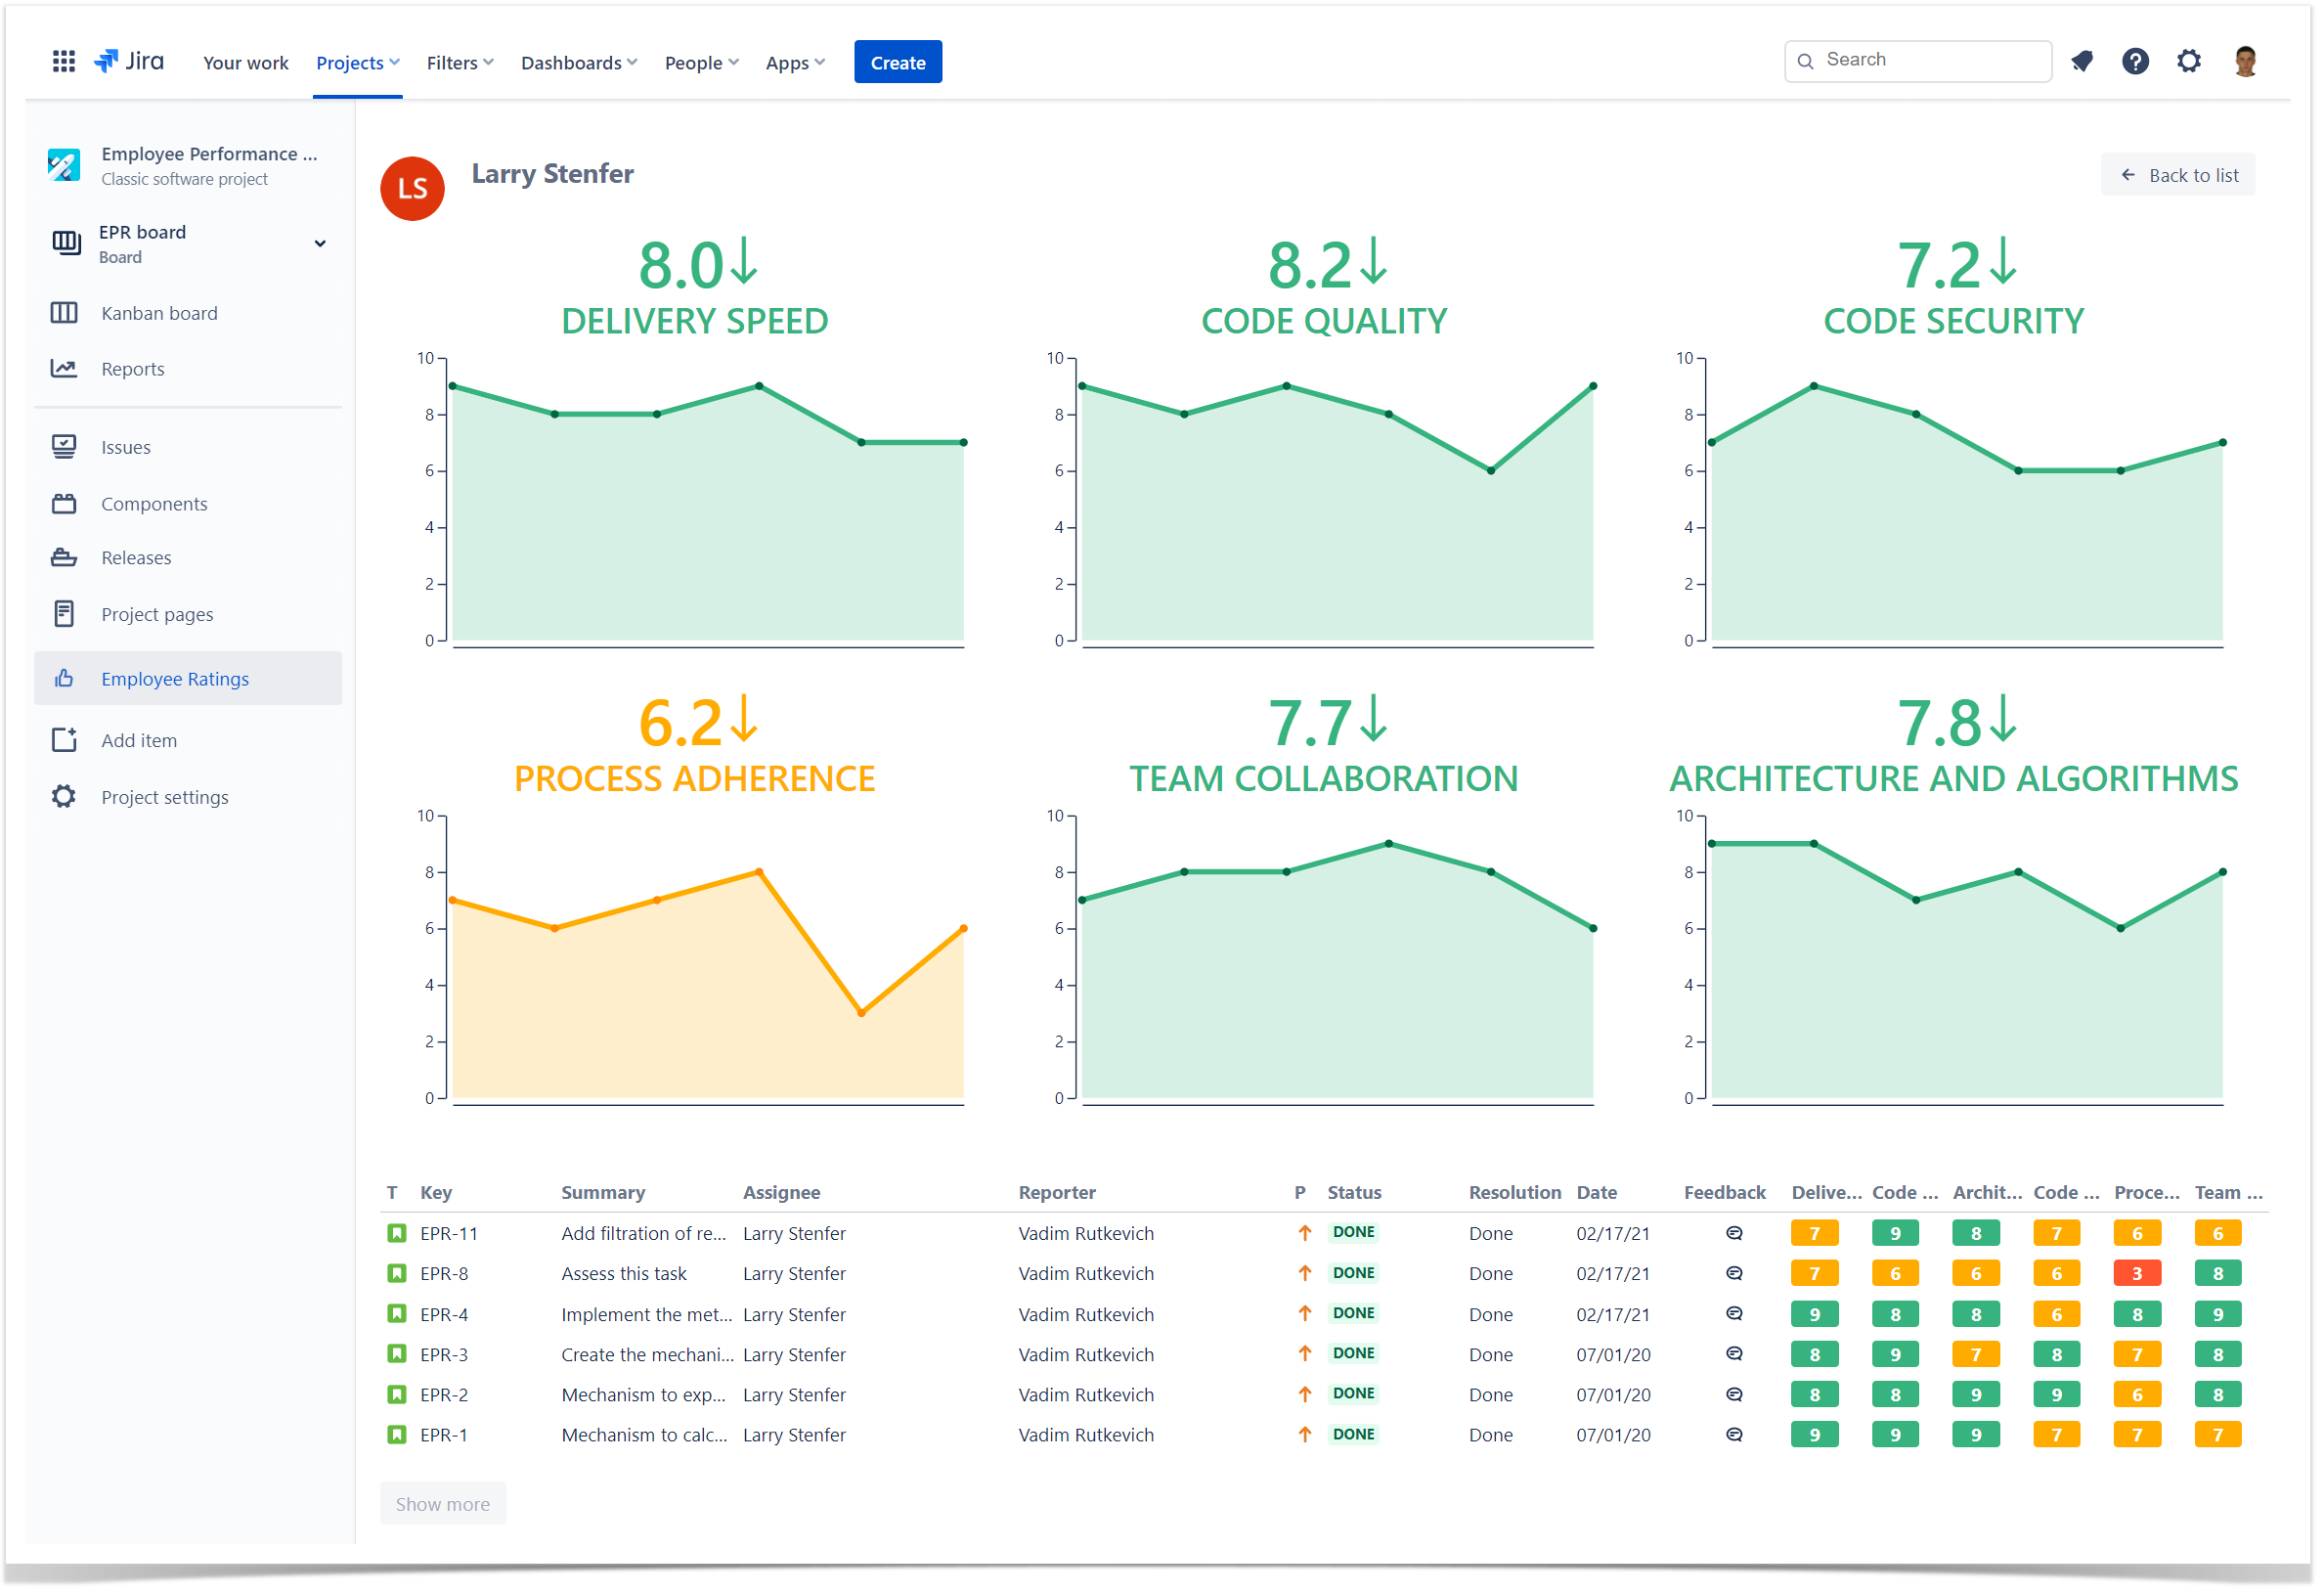 Track the individual employee performance in each project